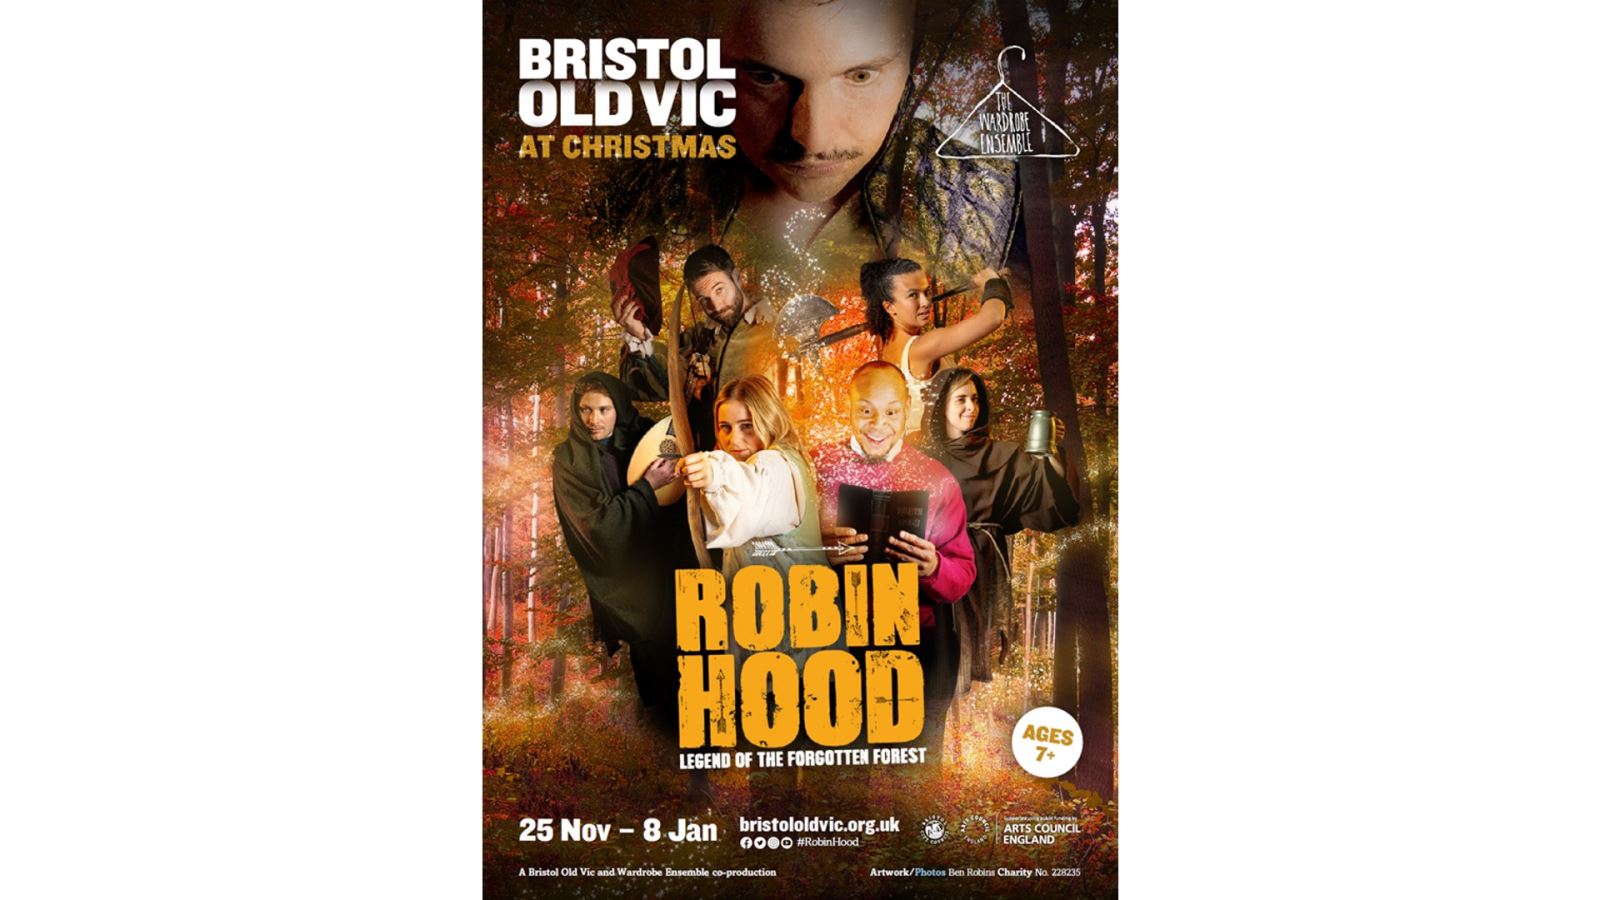 The poster for Robin Hood at Bristol Old Vic